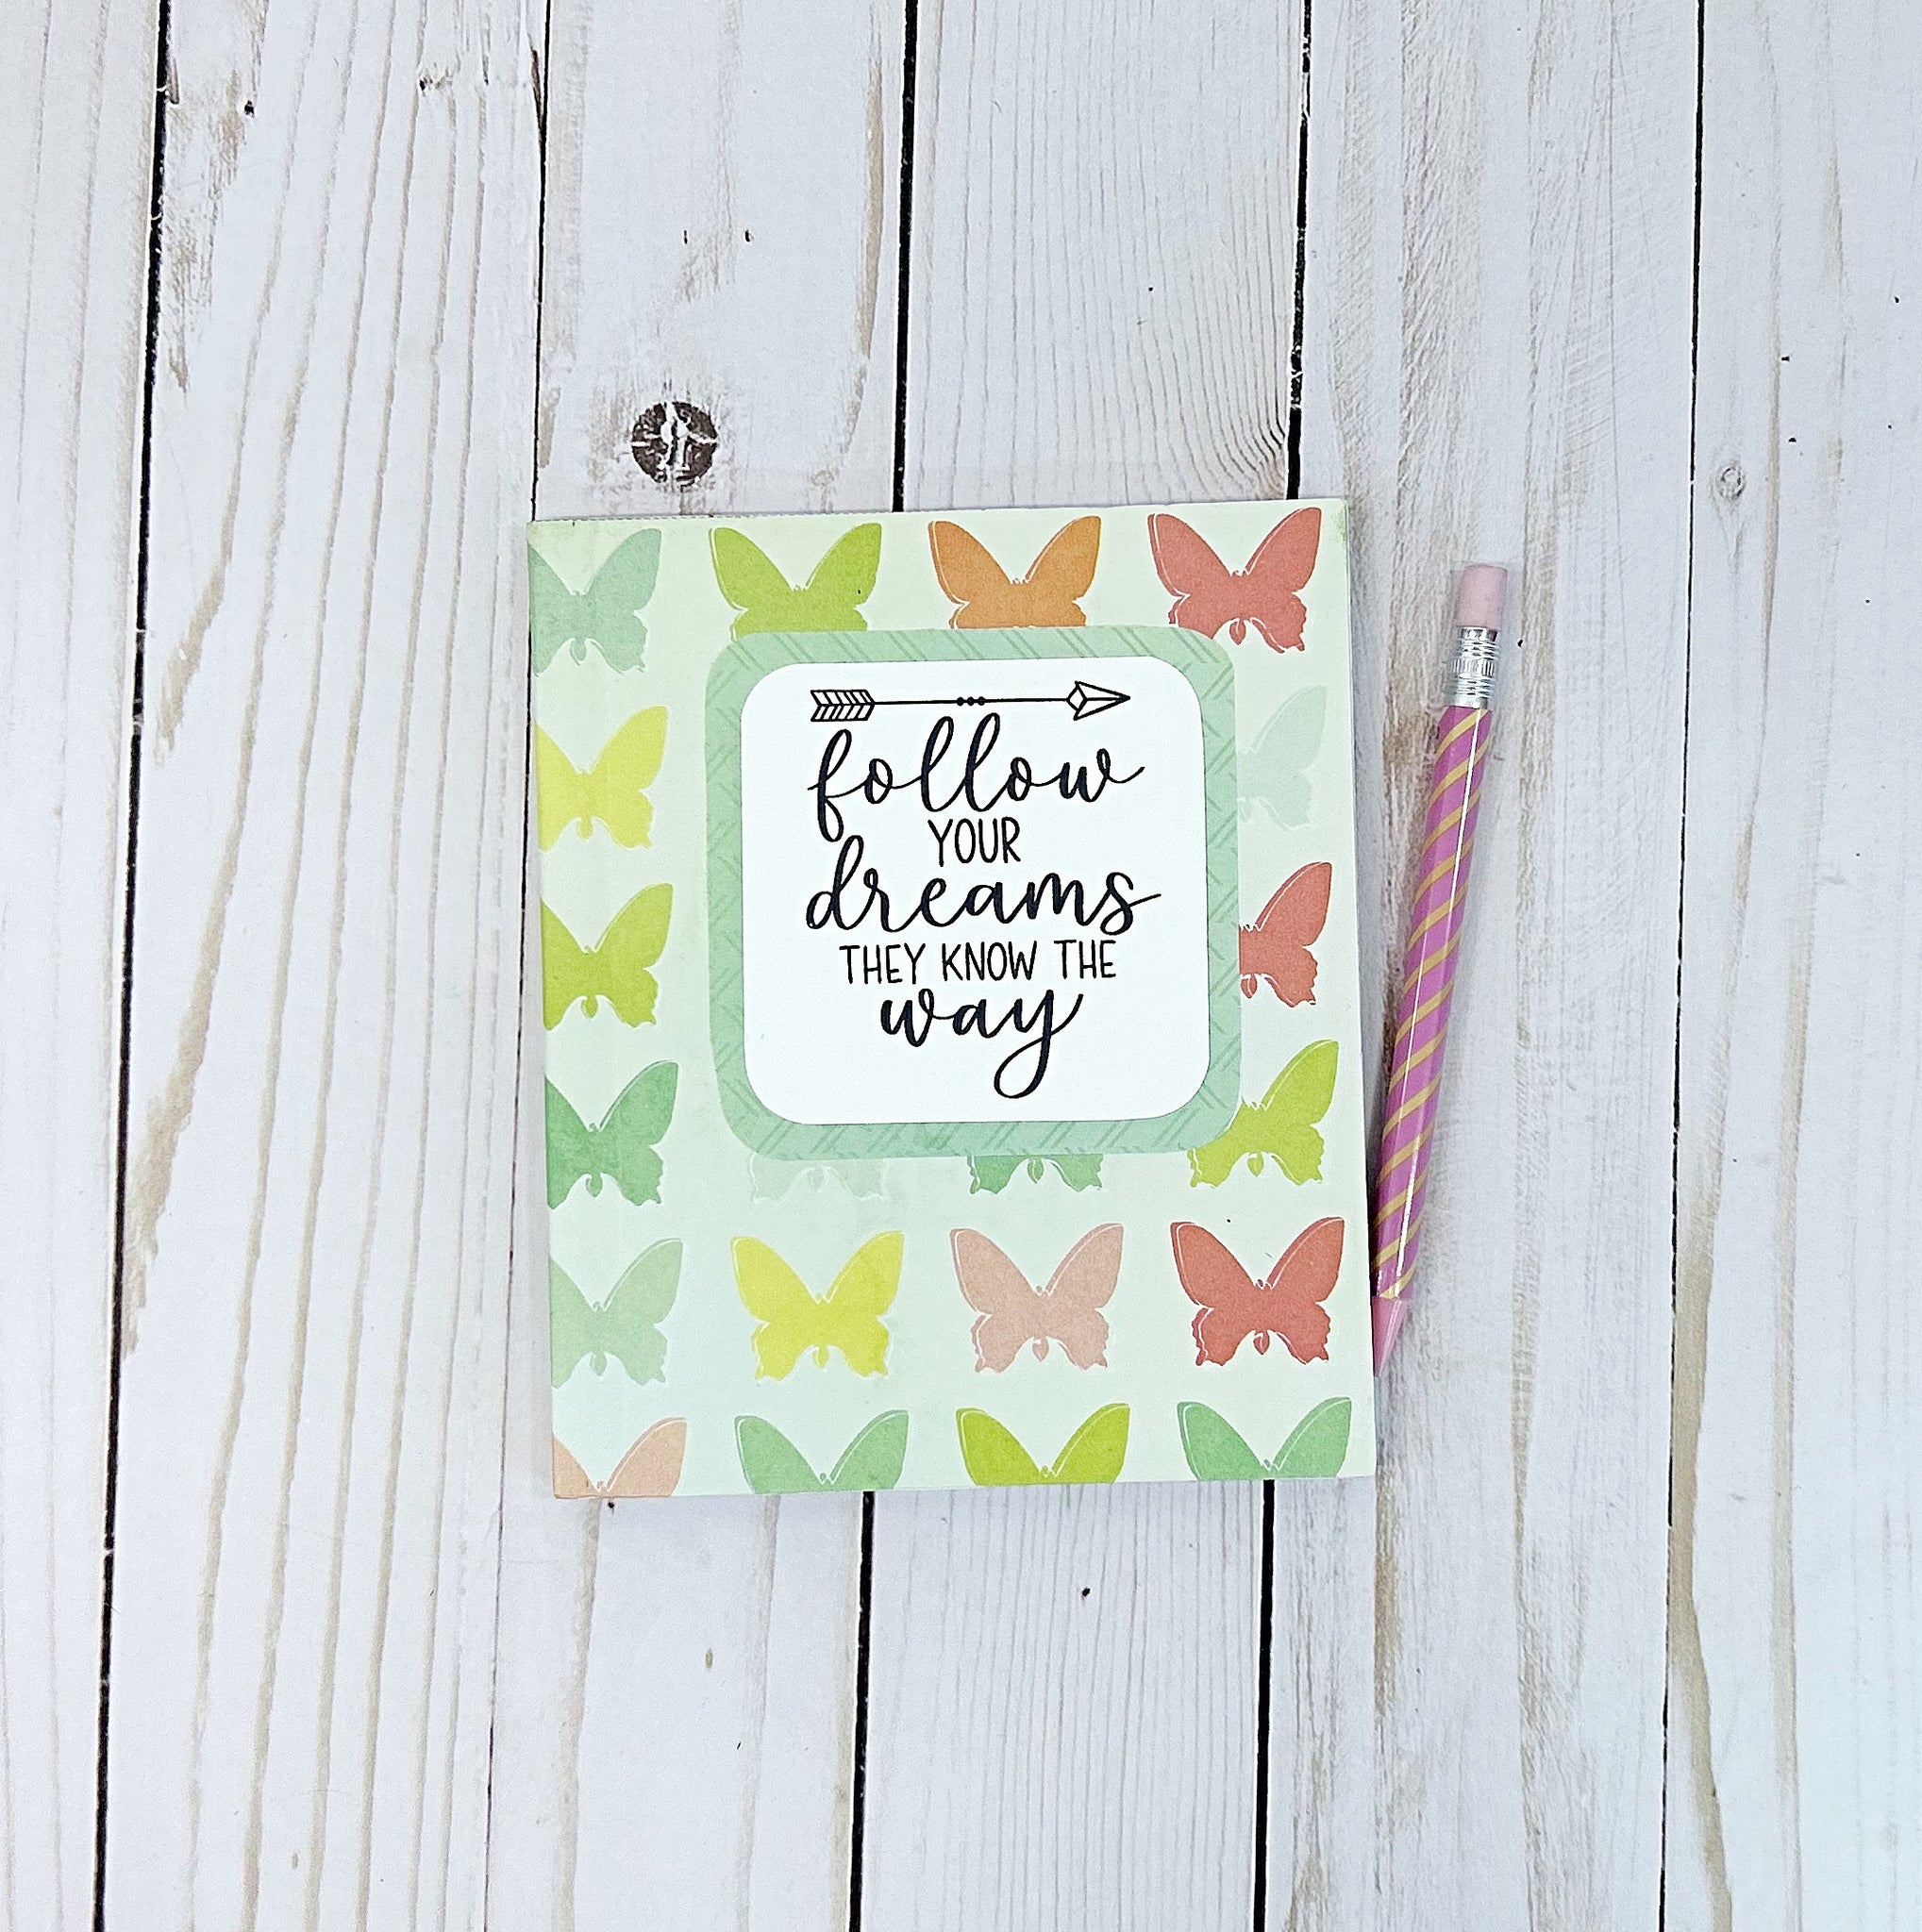 Inspirational Butterfly Notebook Set with Inside Pockets for Notes or Gift Cards